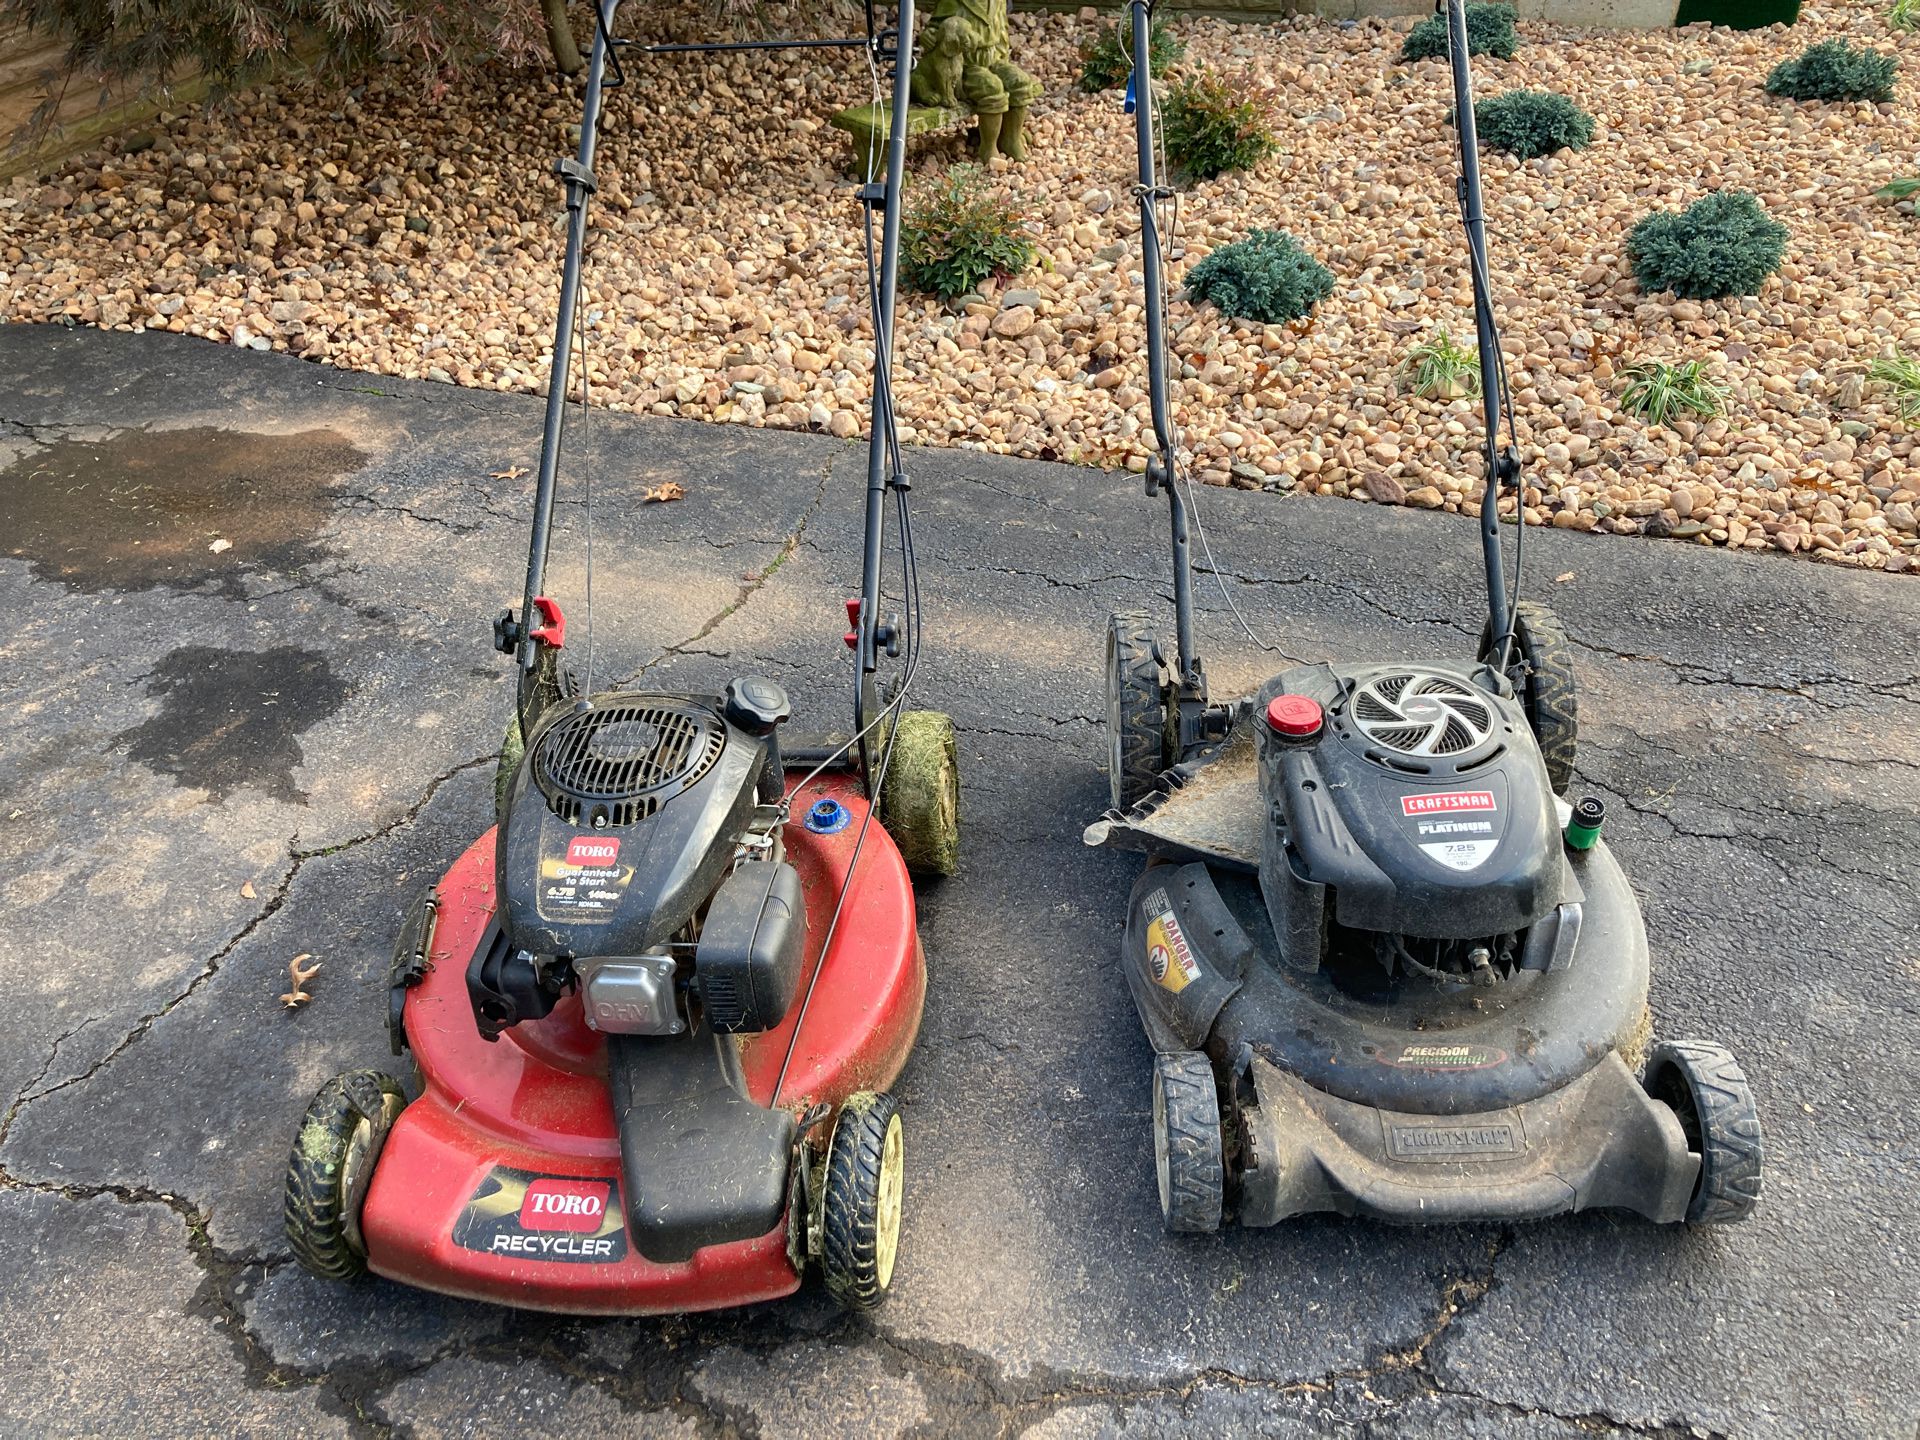 Lawn Mowers (2) Both must go